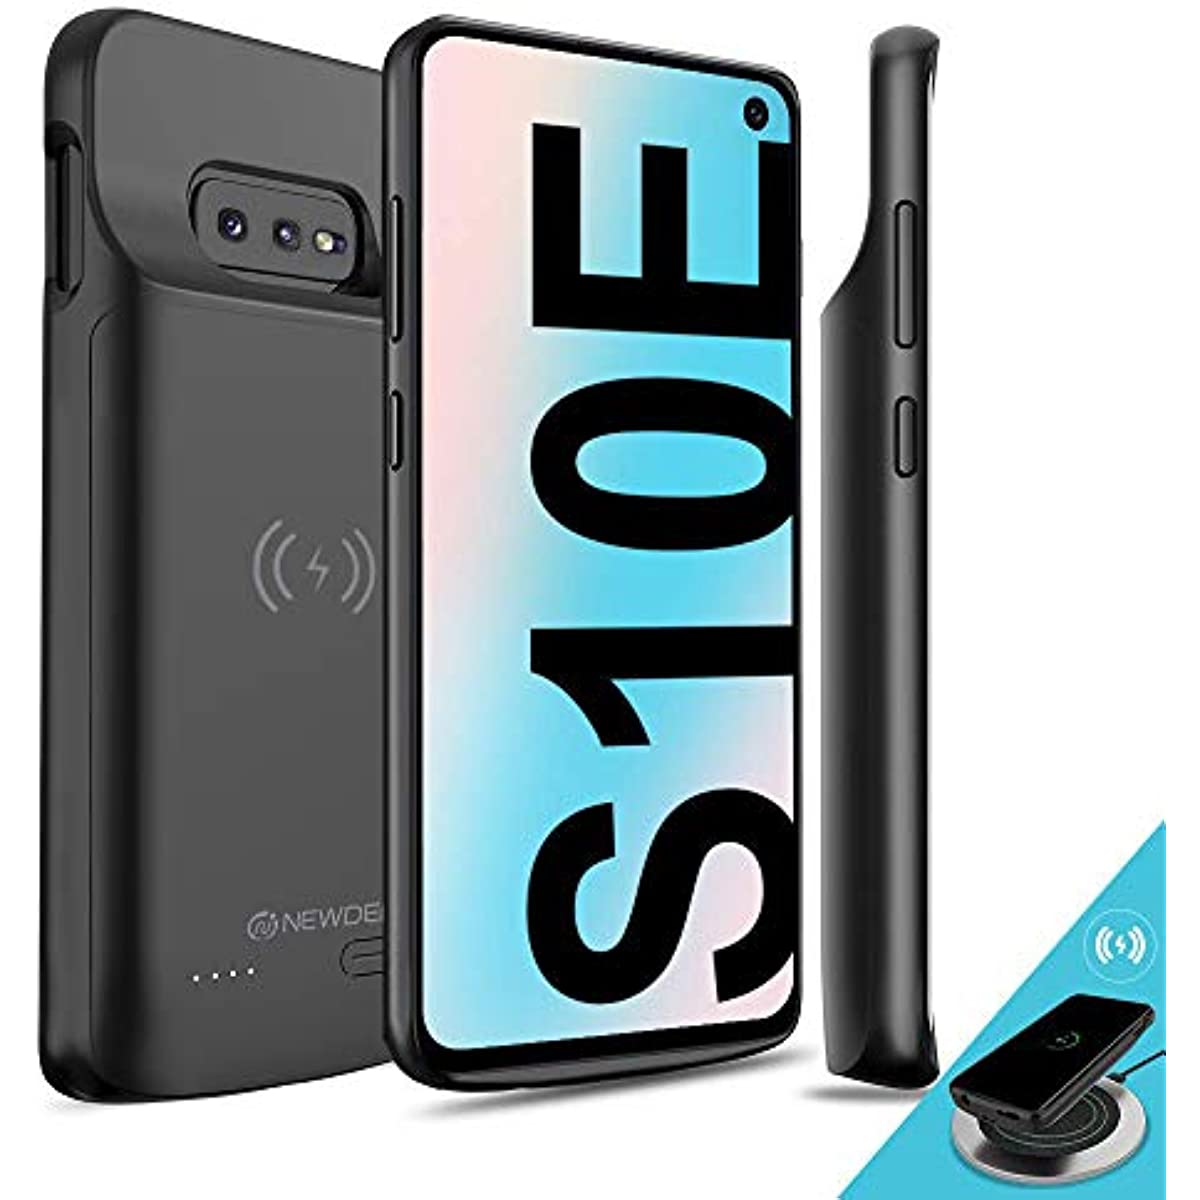 NEWDERY Upgraded Samsung Galaxy S10E Battery Case Qi Wireless Charging Compatible, 4700mAh Slim Rechargeable Portable Extended Charger Case Compatible for Samsung Galaxy S10E (5.8 Inches Black)